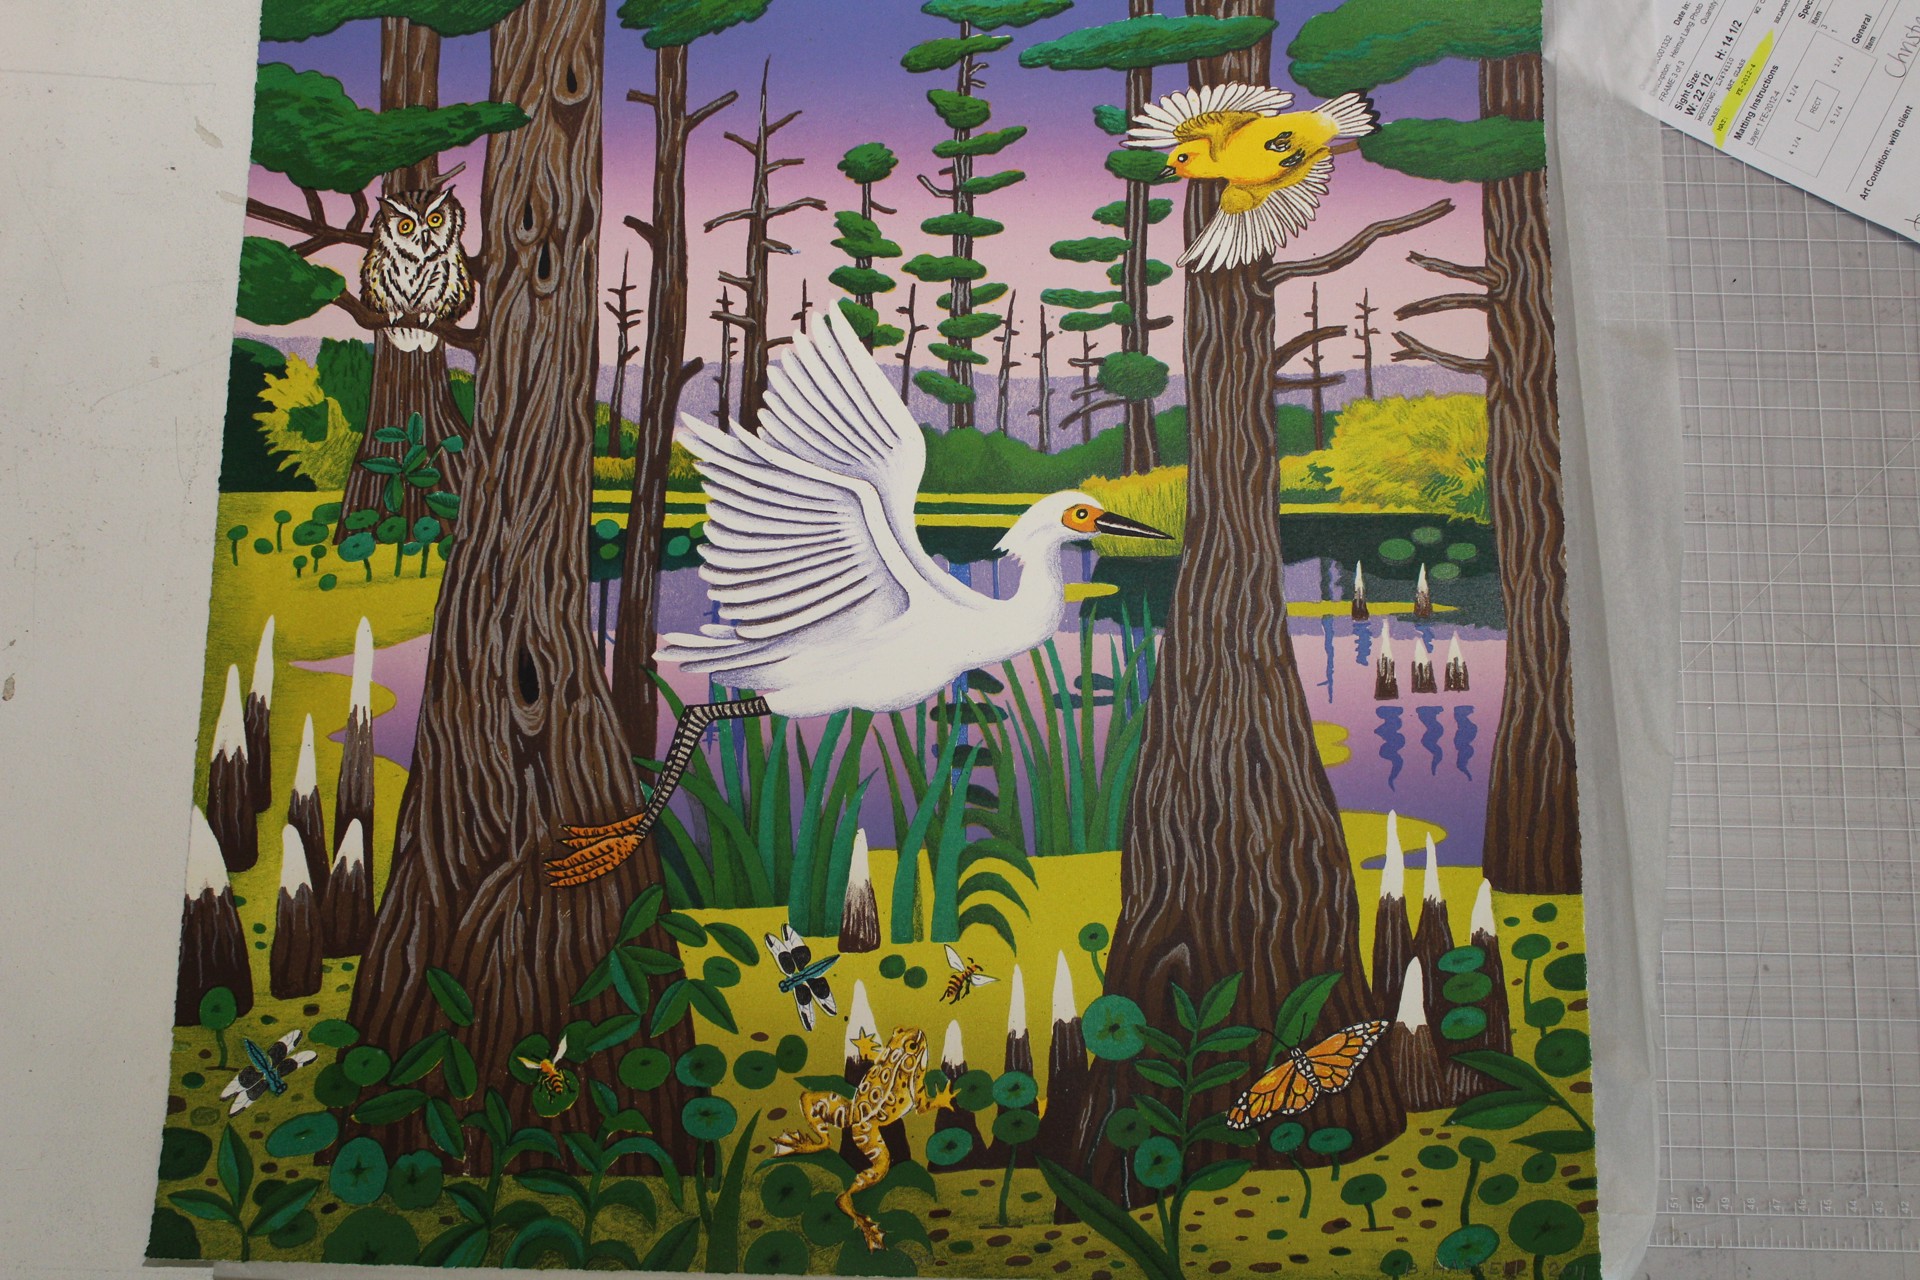 Egret, Grassy Lake by Billy Hassell